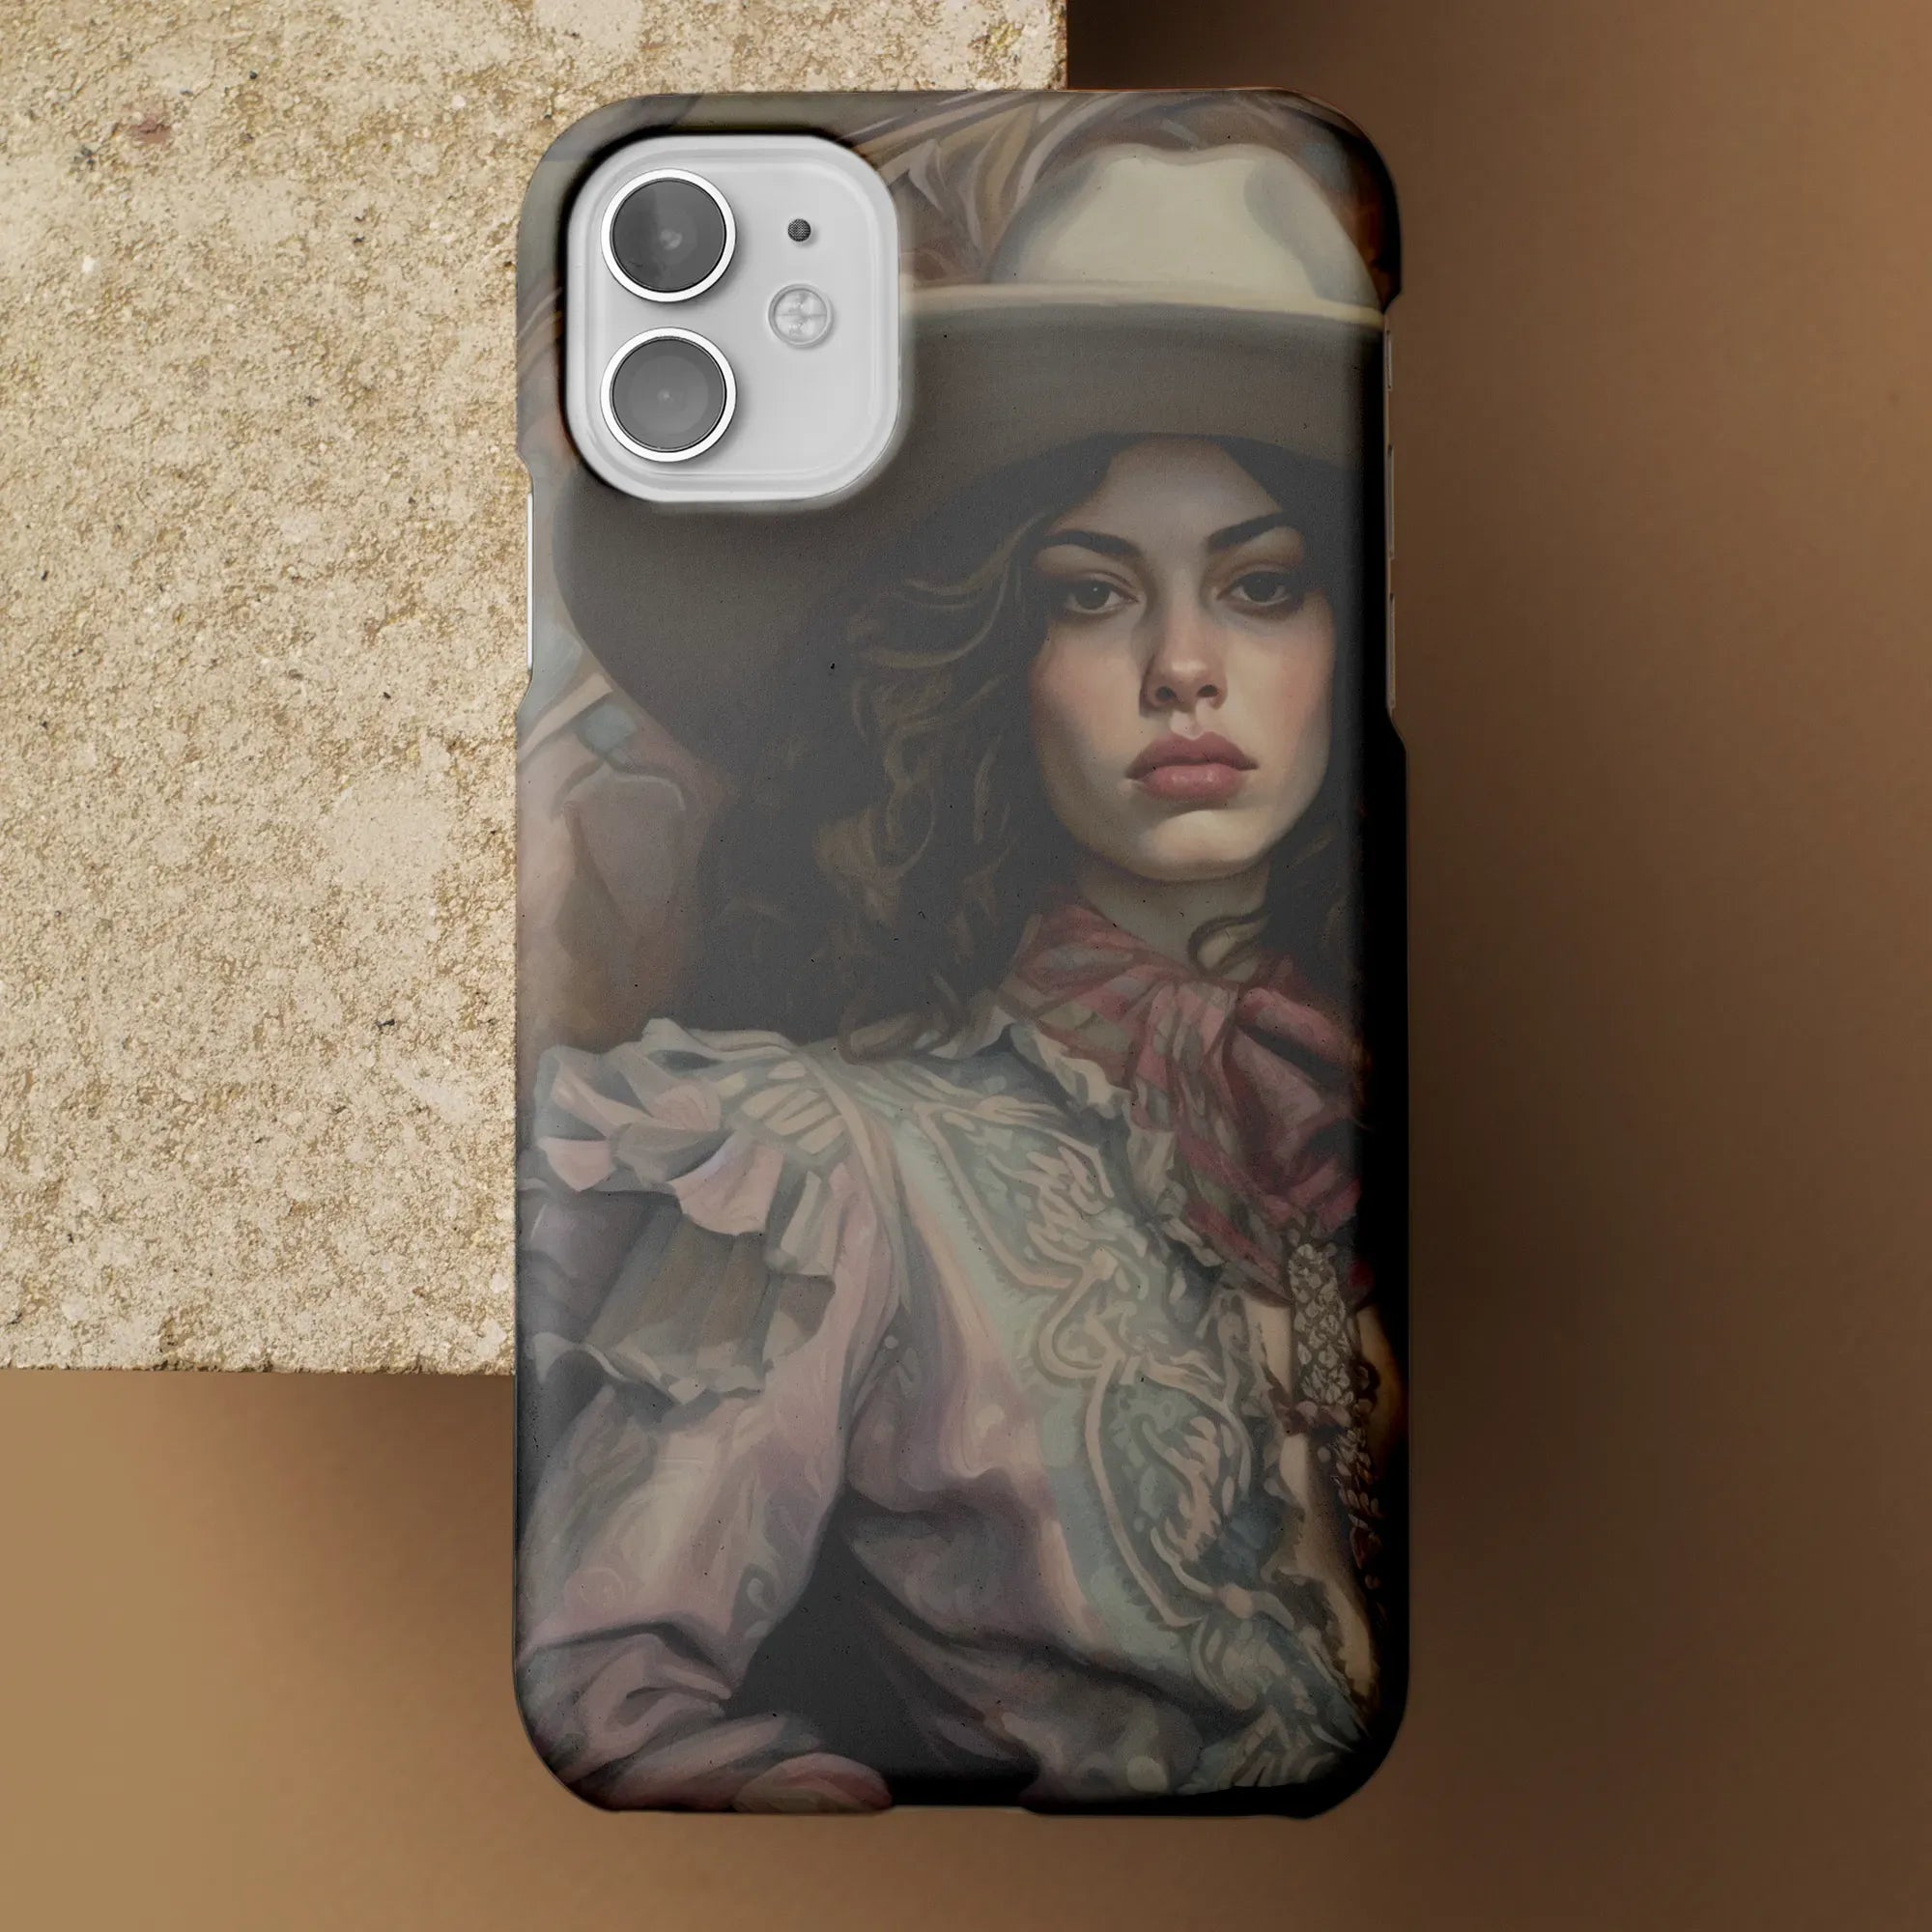 Alex The Lesbian Cowgirl - Sapphic Art Phone Case - Mobile Phone Cases - Aesthetic Art